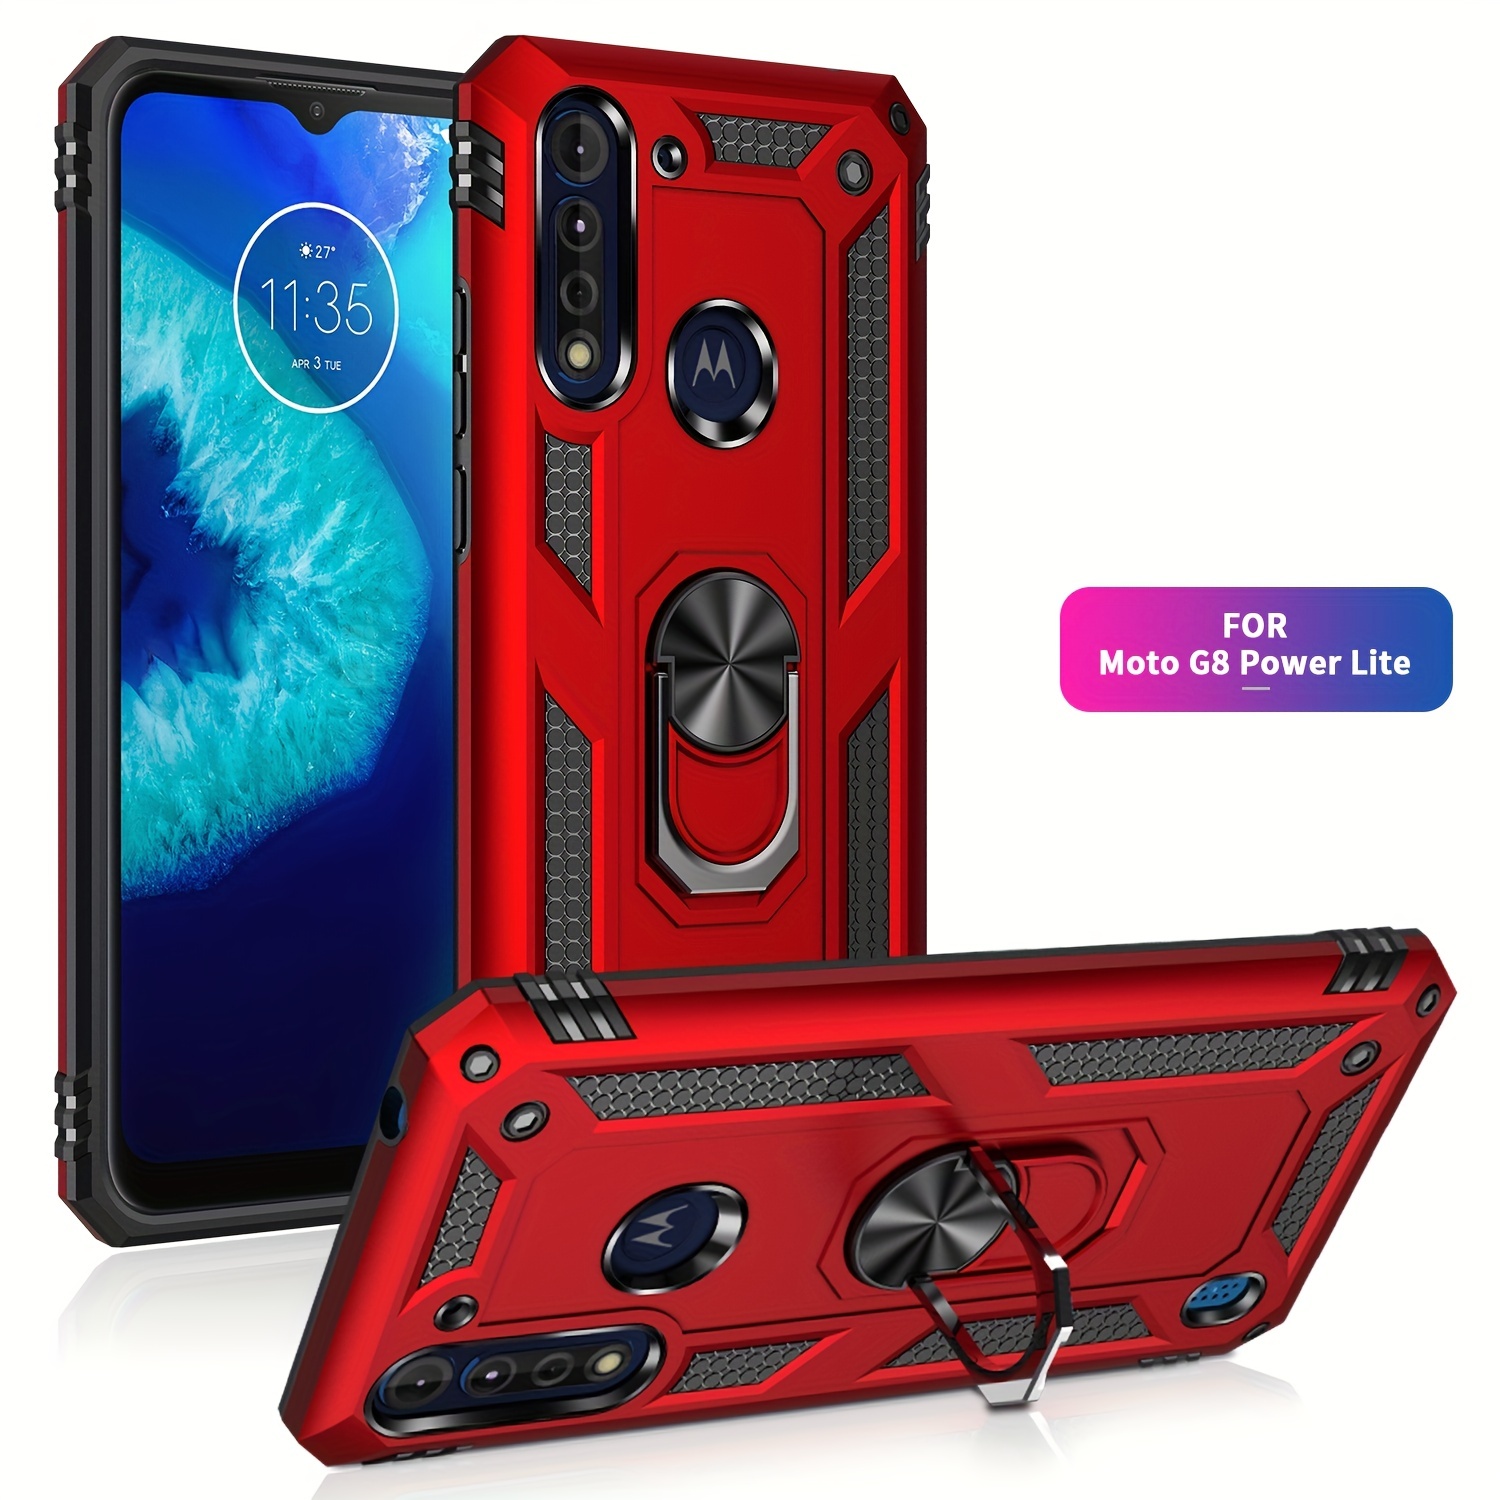 Protect Your Moto G8 Power Lite With This Durable Dropproof Phone